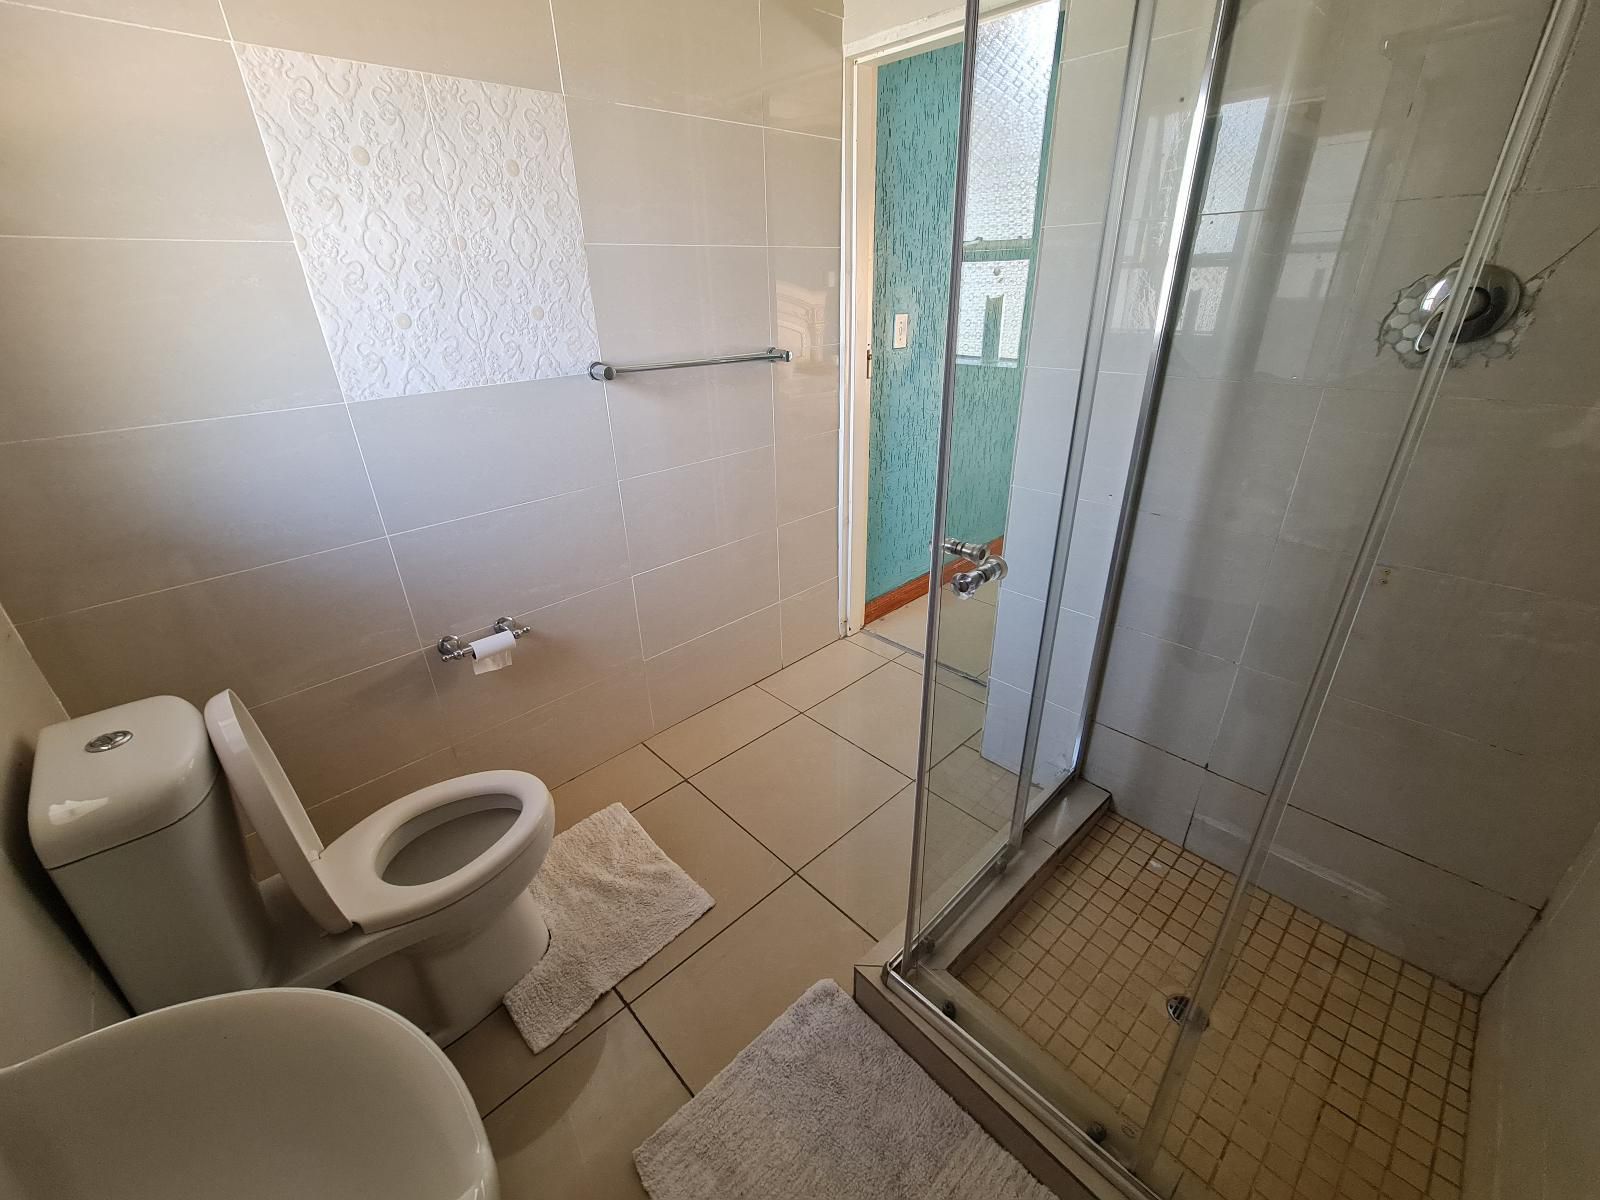 Quereba Bed And Breakfast Riviera Park Mahikeng North West Province South Africa Bathroom